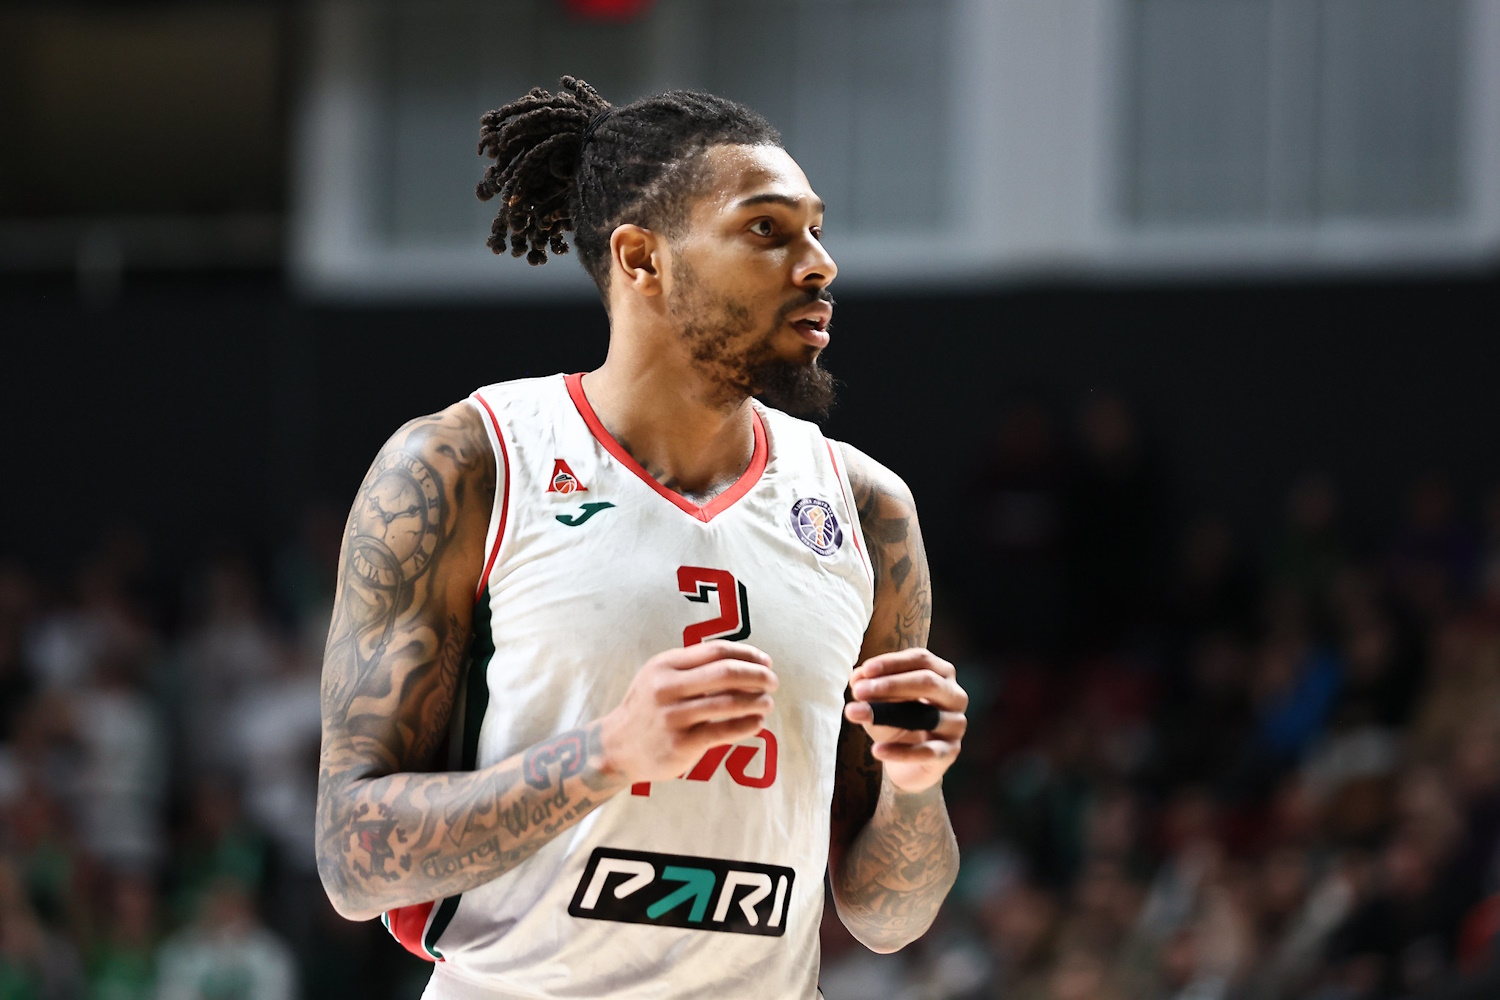 DeVaughn Akoon-Purcell joins UNICS